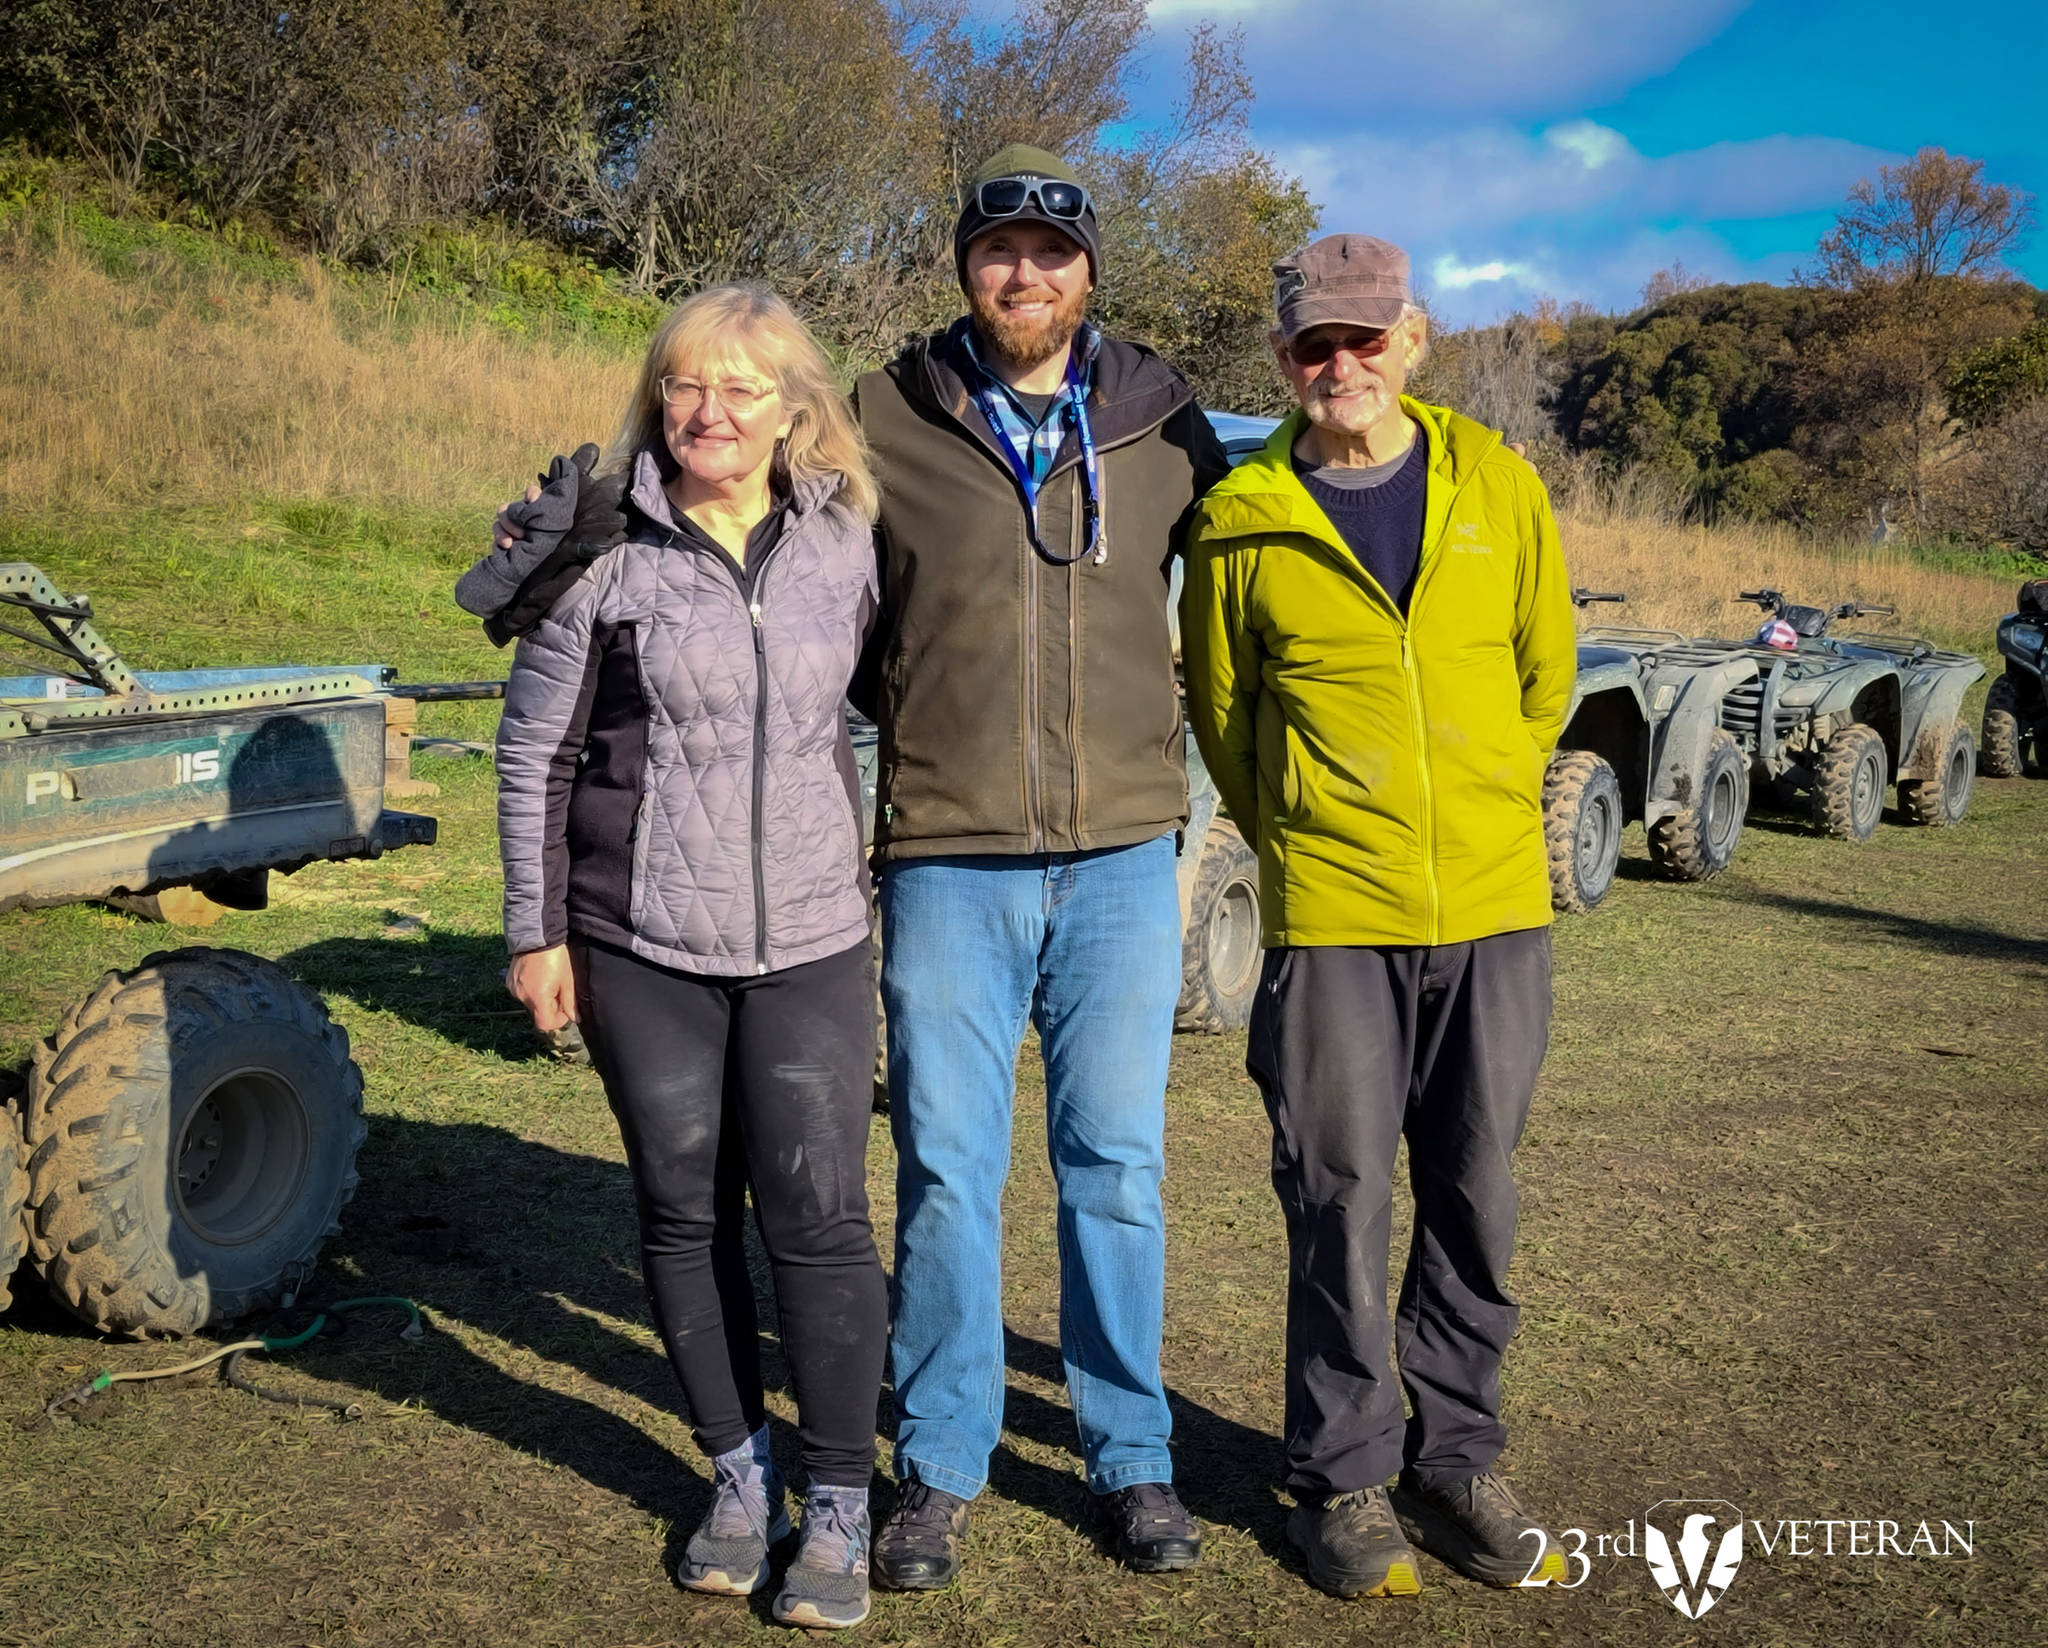 Catkin Burton Kilcher, left, 23rd Veteran founder Michael Waldron, center, and Atz Kilcher, right, pose on Thursday, Oct. 15, 2020, in an outdoor wilderness experience facilitated by the Kilcher family on the Kilcher homestead and the Kachemak Bay backcountry near Homer, Alaska, last month. (Photo courtesy of 23rd Veteran)